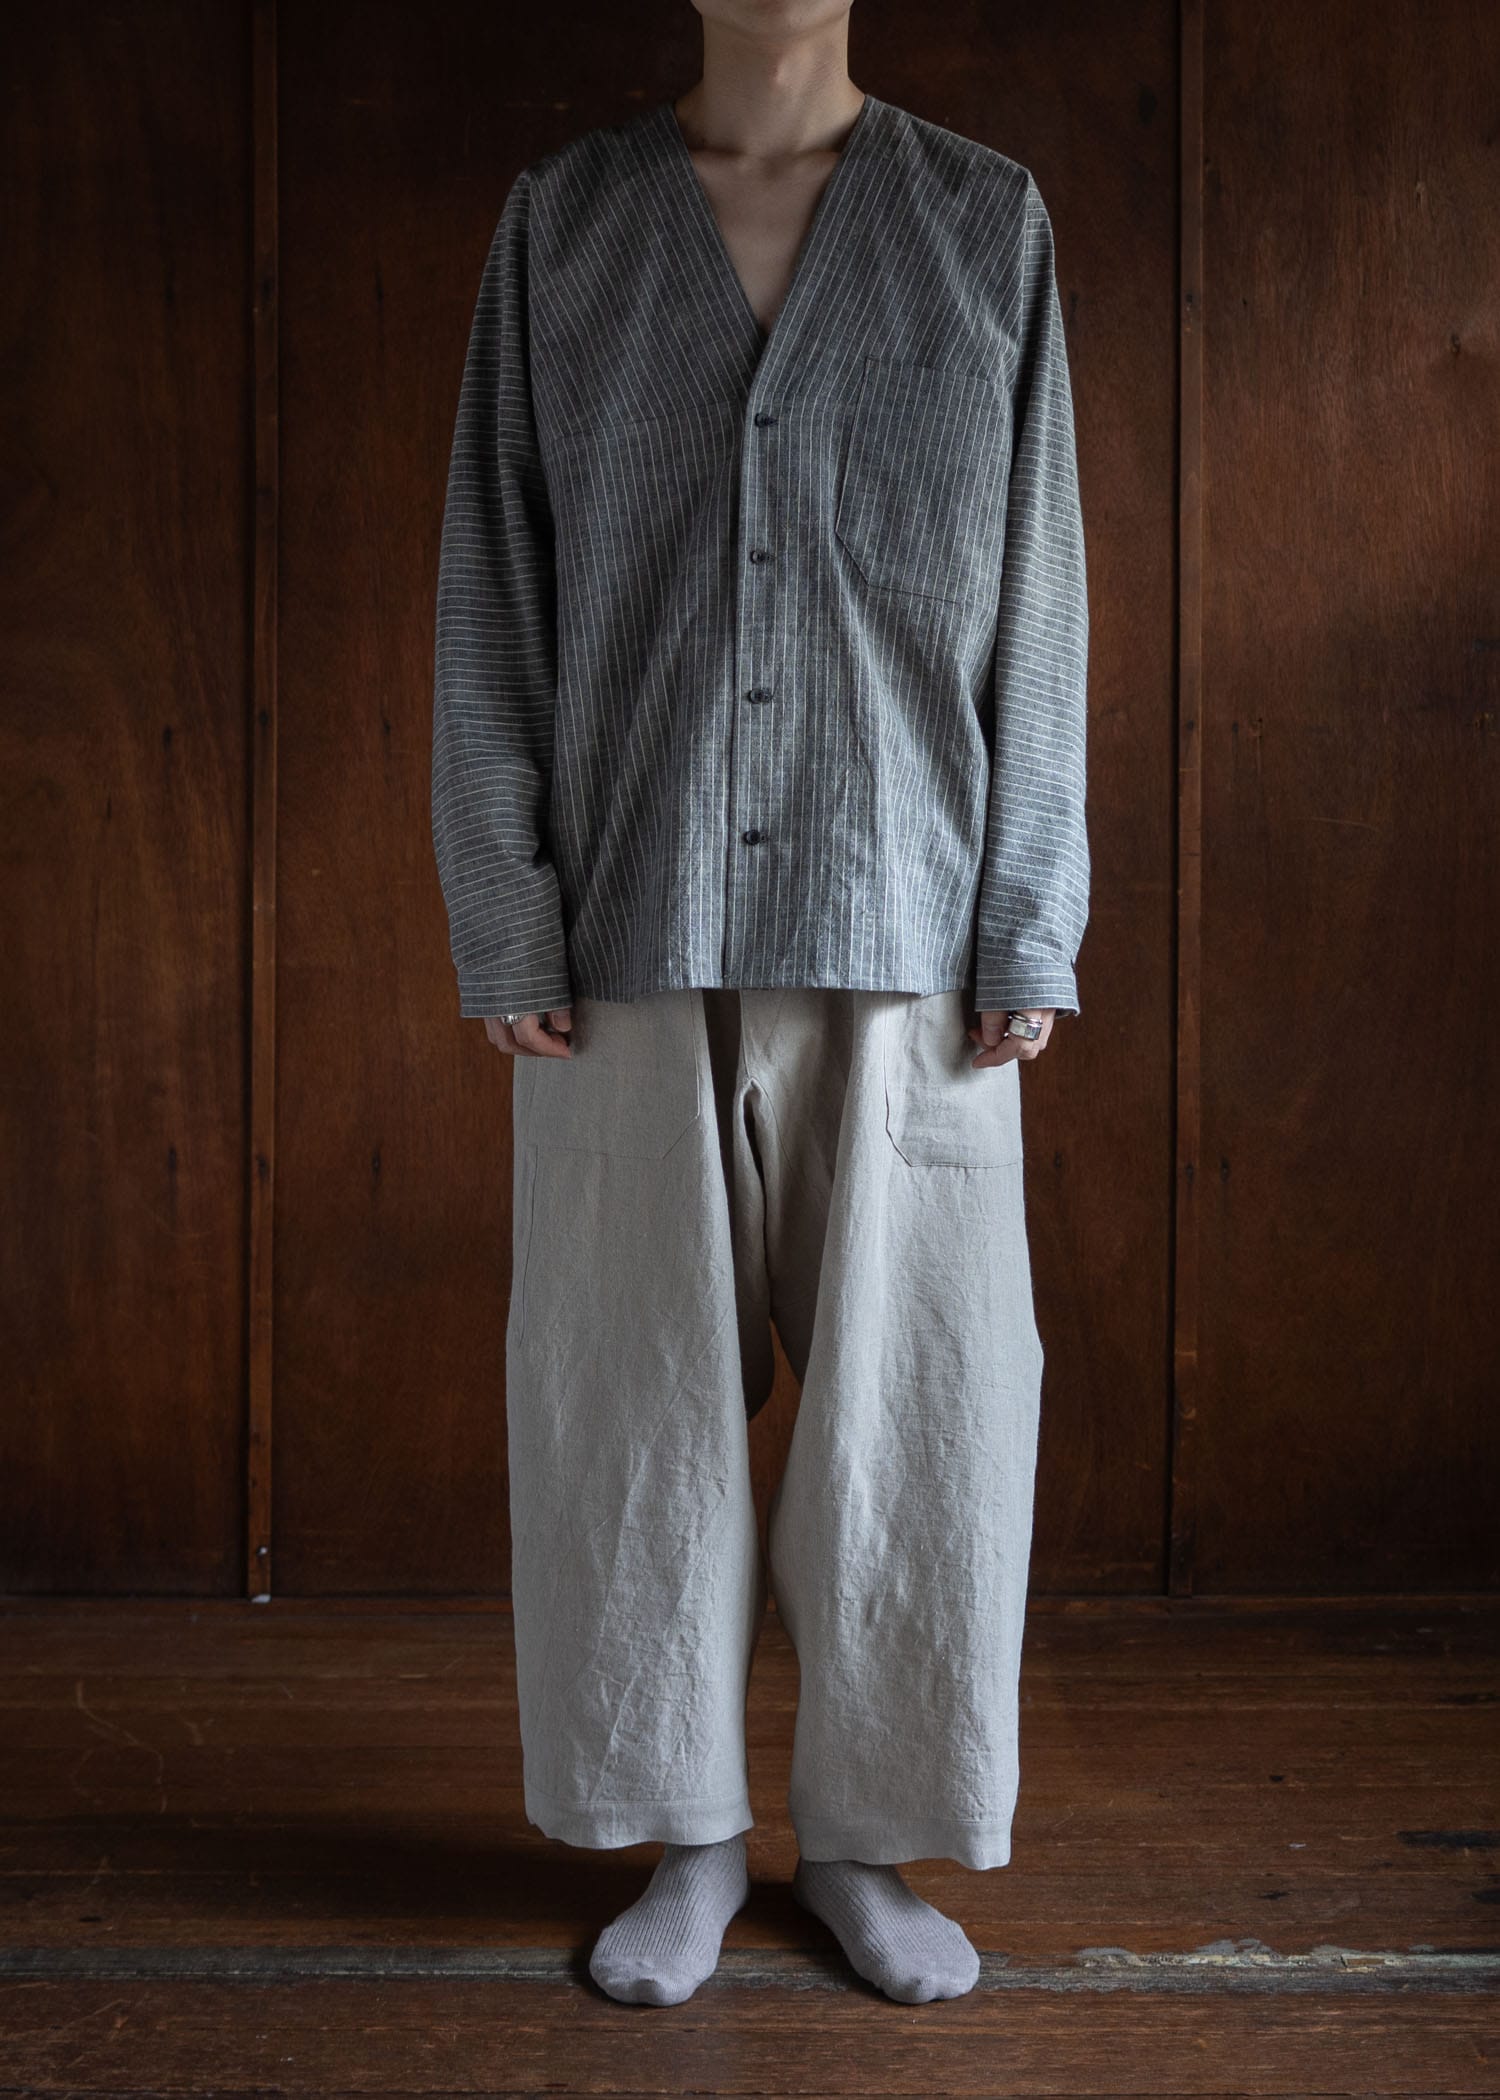 JAN-JAN VAN ESSCHE TROUSERS#80"" LOOSE FIT LOW CROTCH TROUSERS WITH ELASTIC WAISTBAND HEMP CLOTH NATURAL